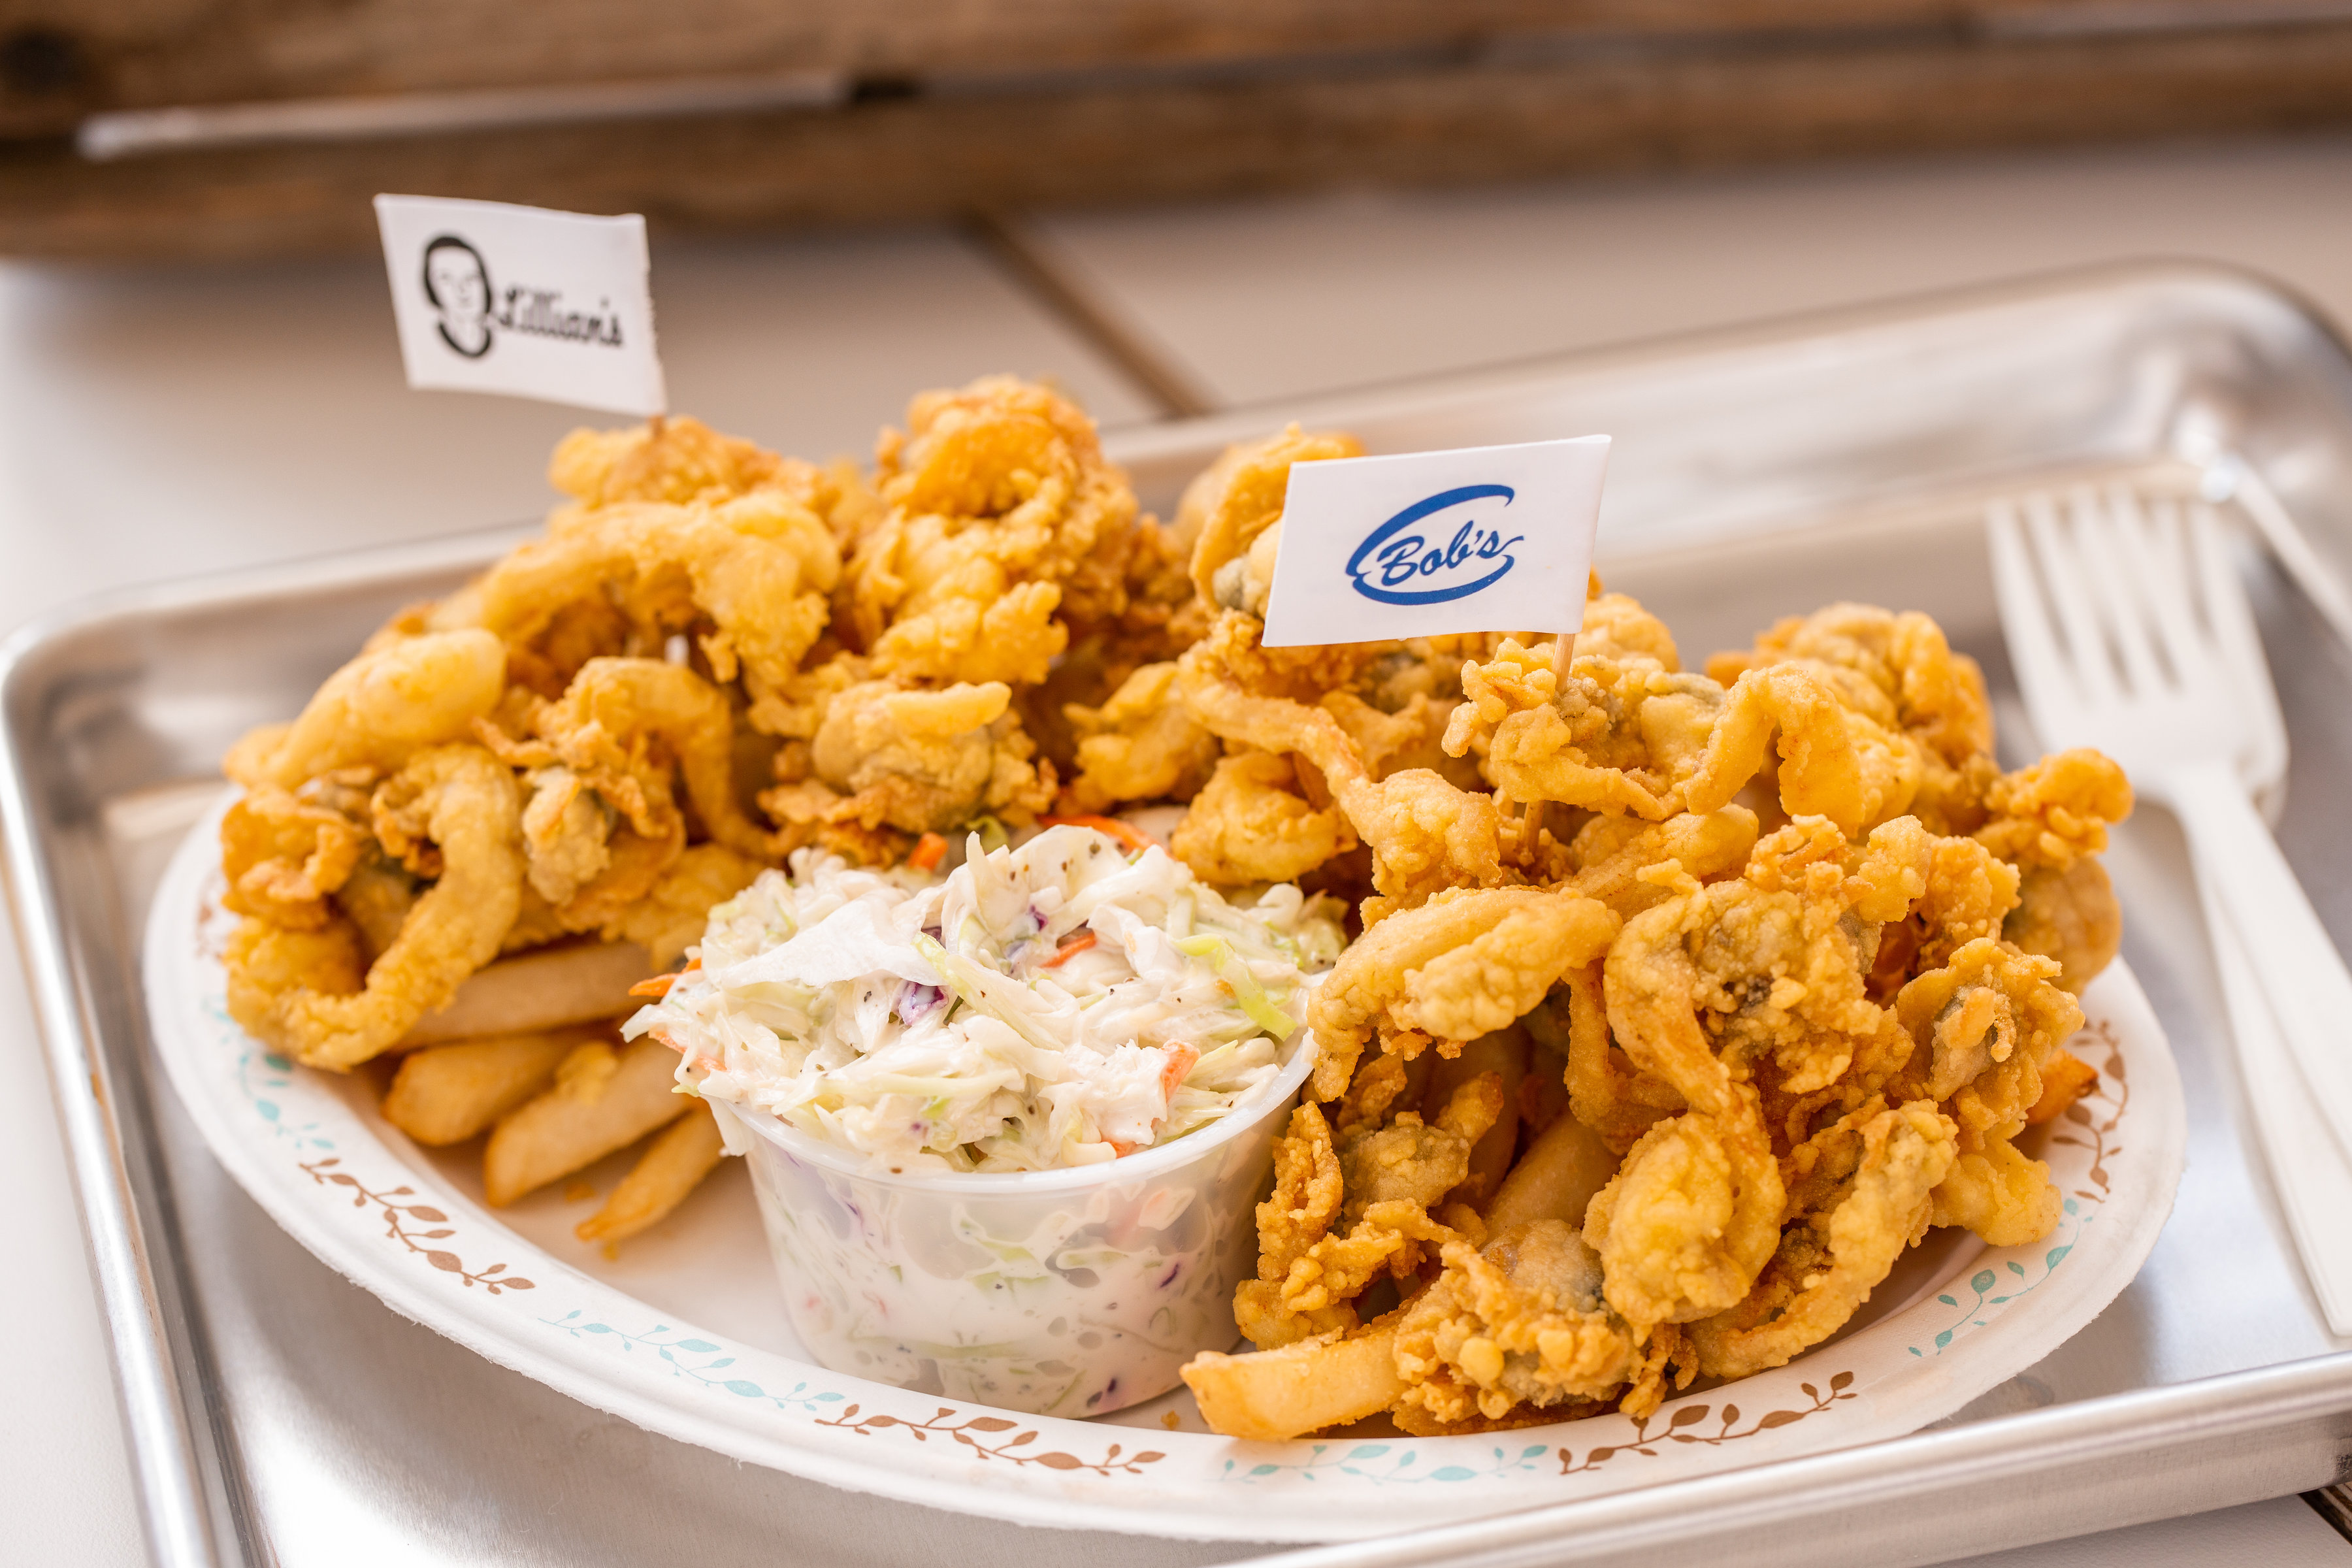 Fried seafood platter with clams, fries, and coleslaw